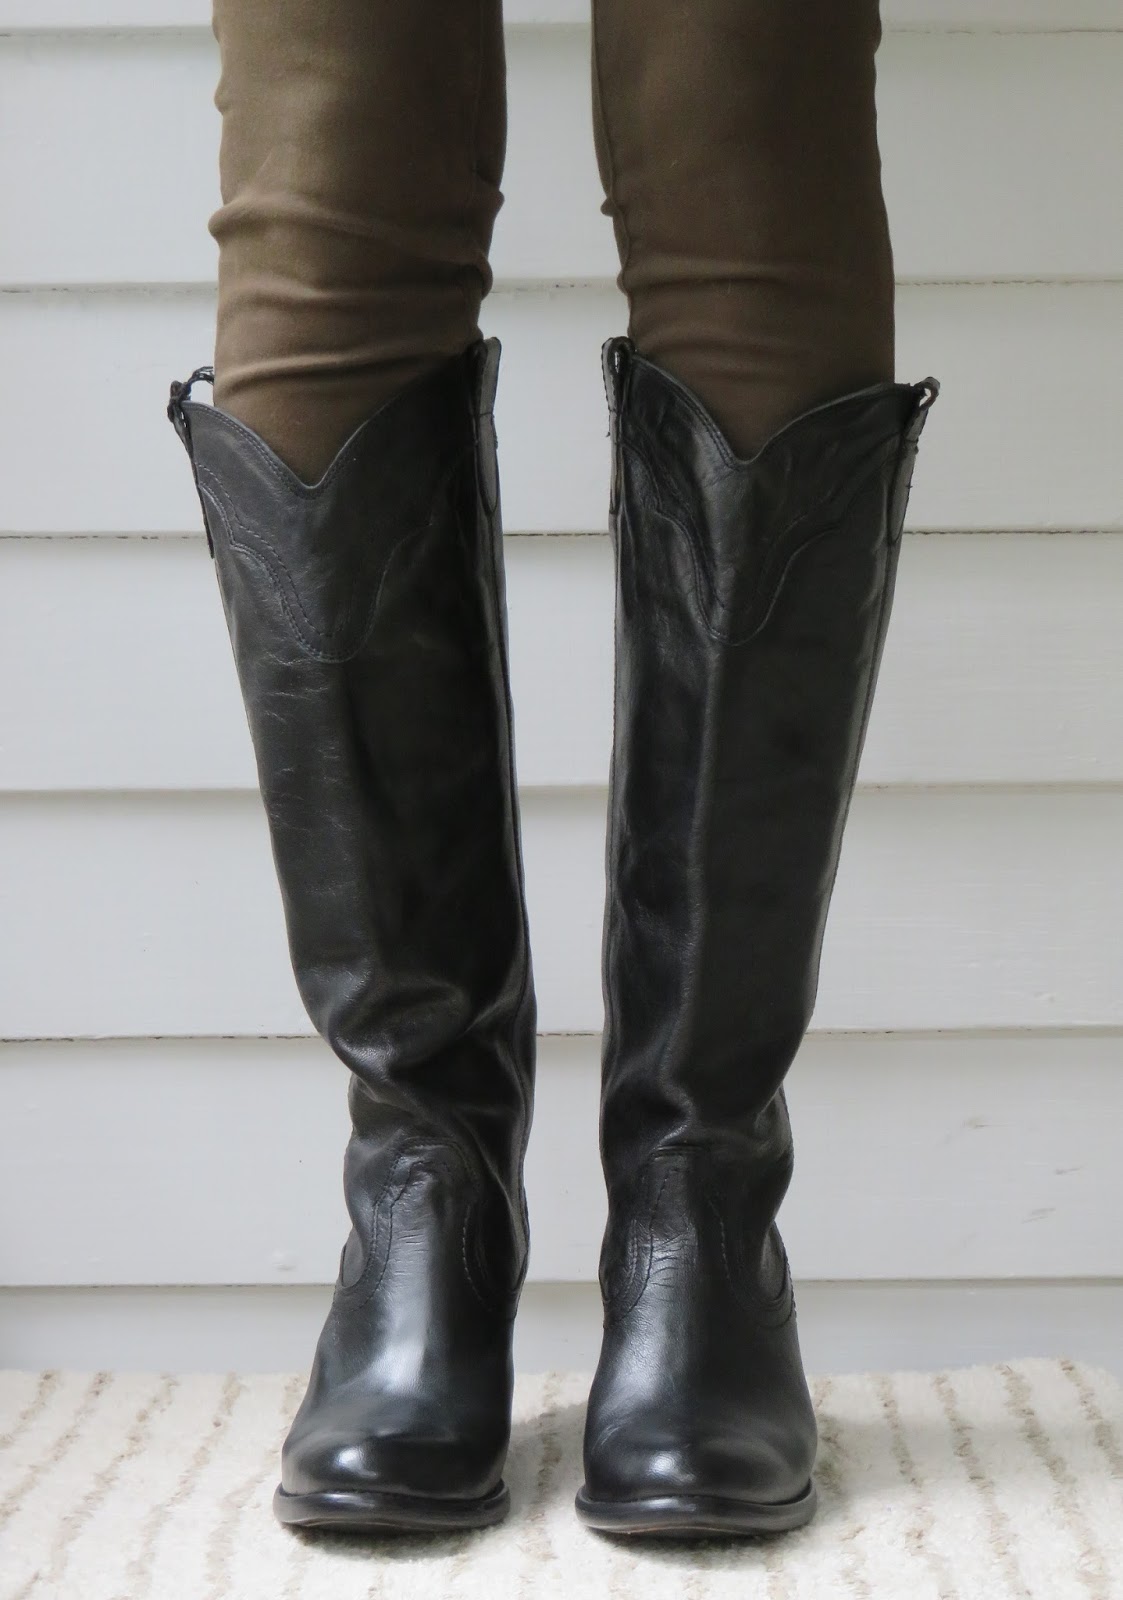 Howdy Slim! Riding Boots for Thin Calves: Frye Tabitha Pull On Tall